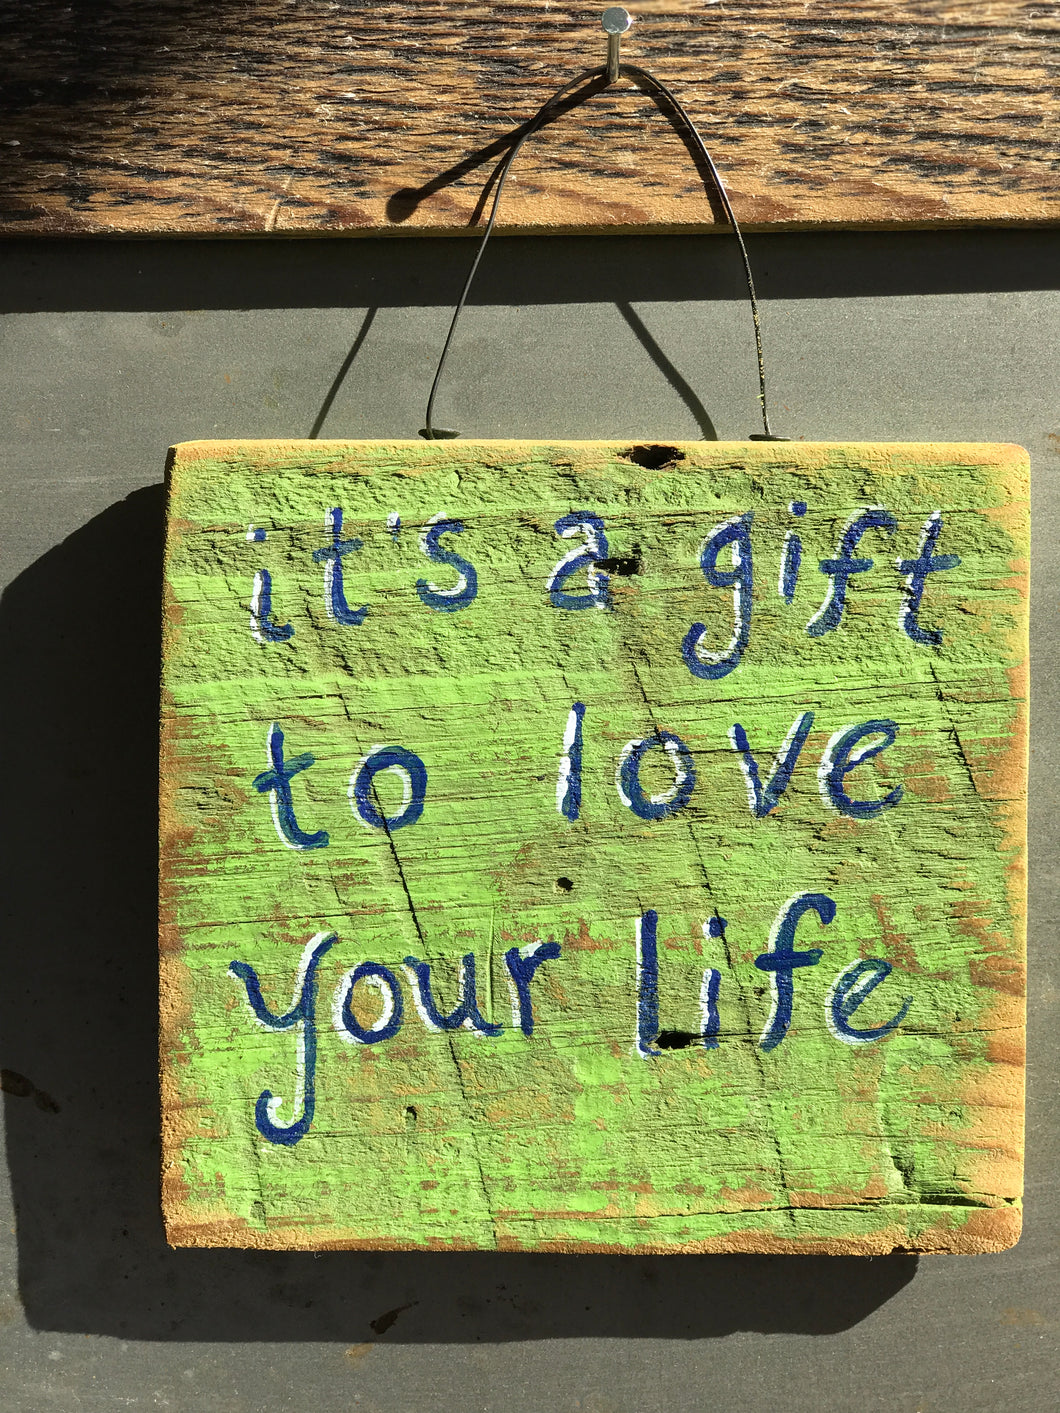 It's A Gift To Love Your Life / Upcycled Hand-painted Wood Sign